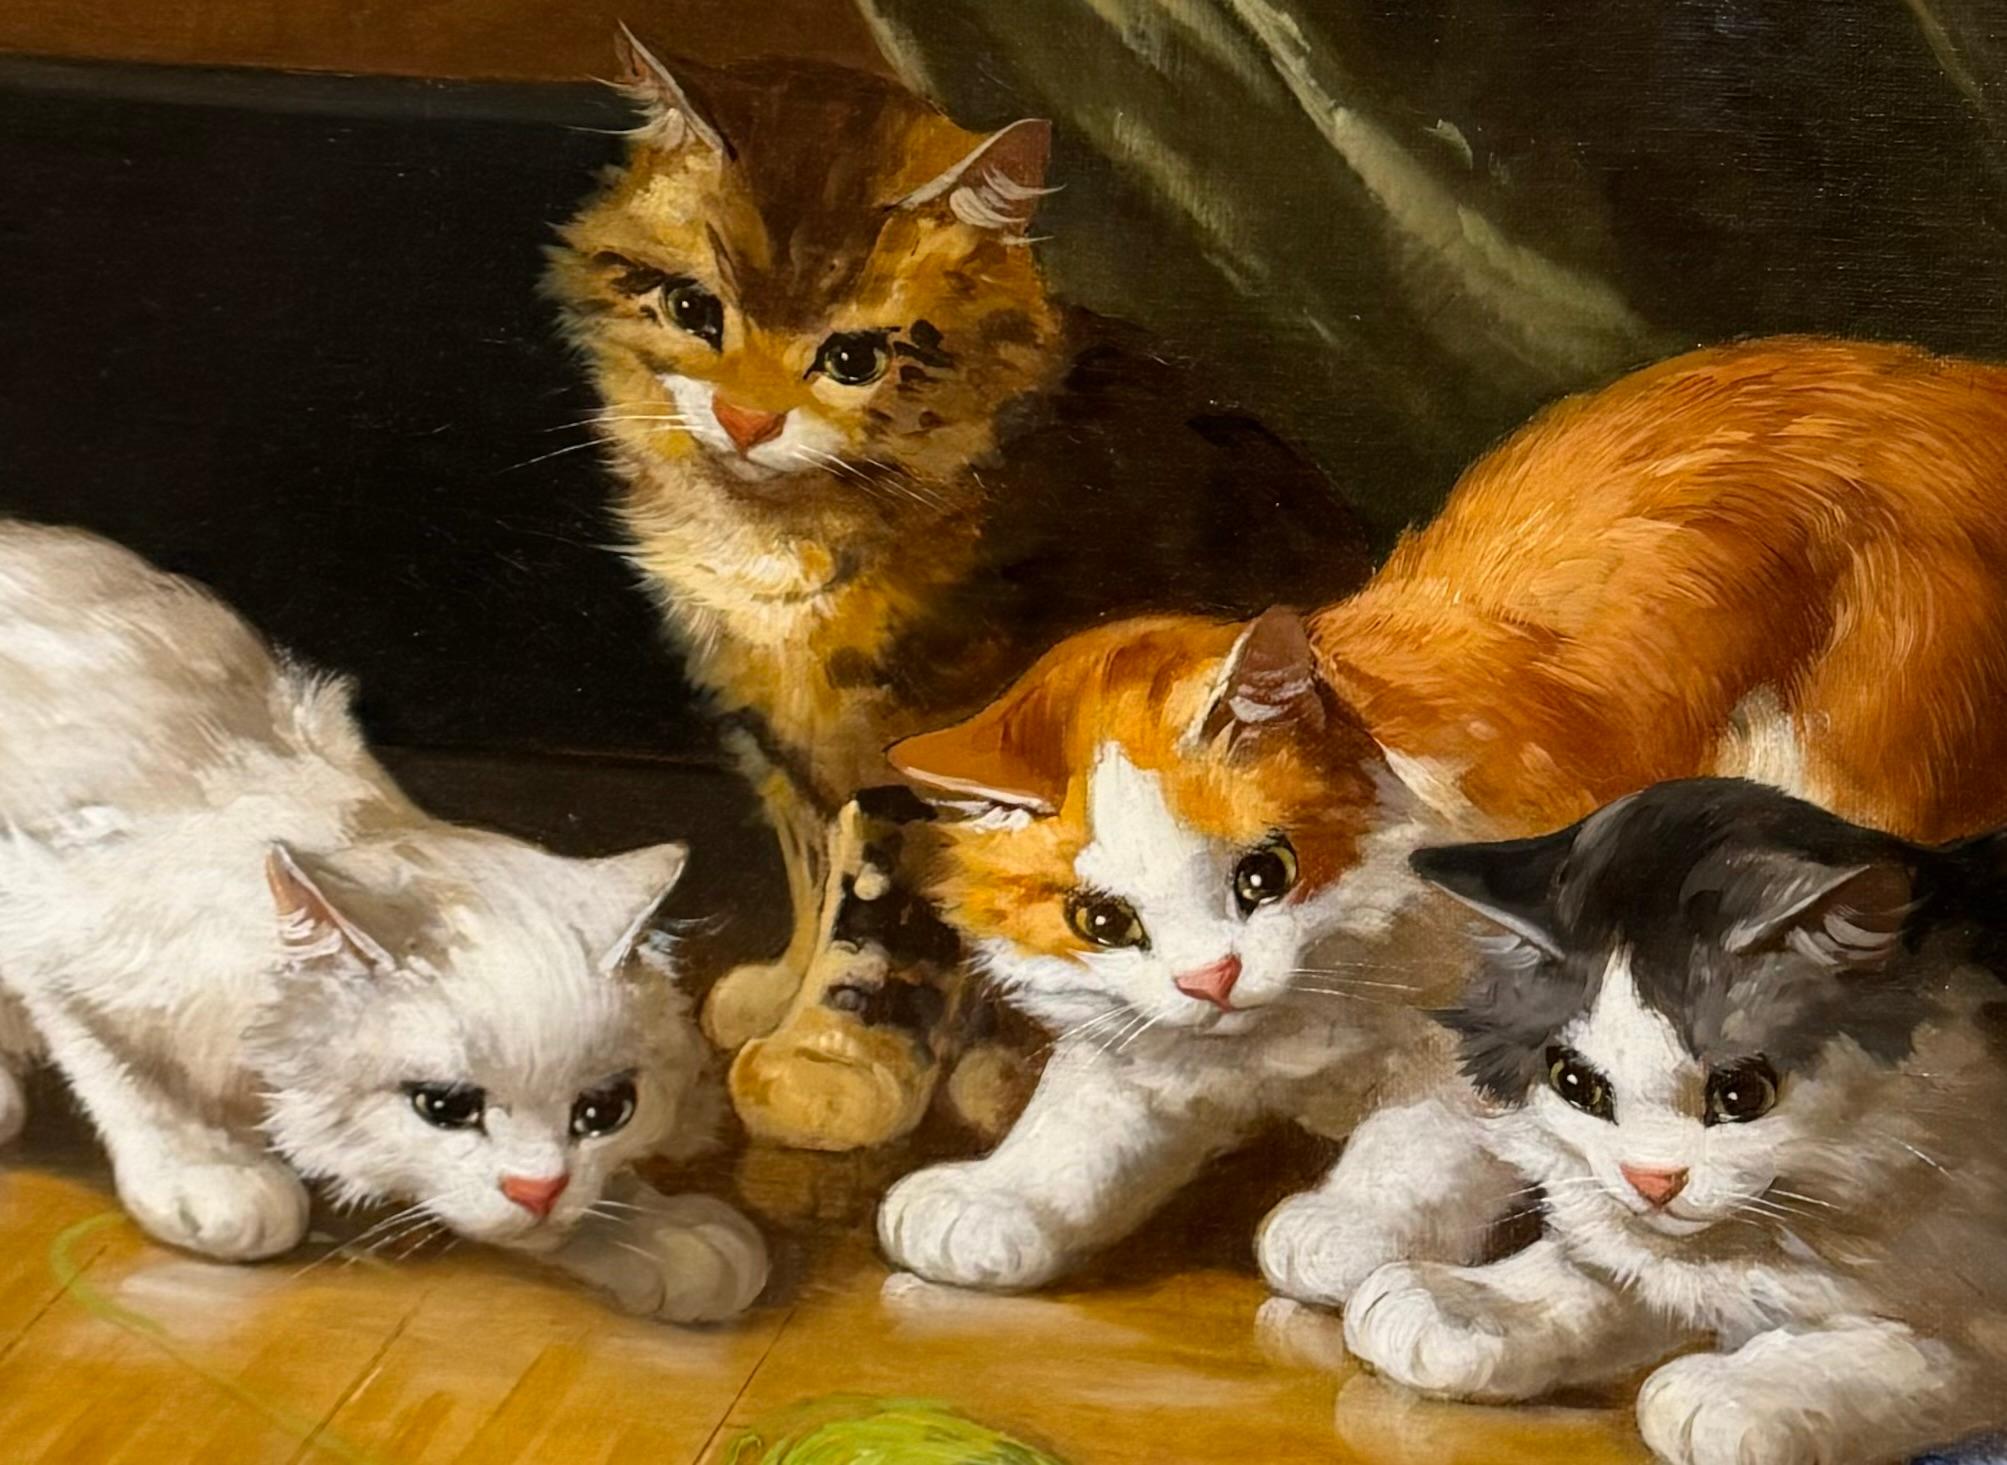 Alfred-Arthur Brunel de Neuville (1852-1941) was a French painter known predominantly for still life paintings and animals, mainly cats.
This painting is a fine example of his favourite subjects and certainly one of the most playful of his